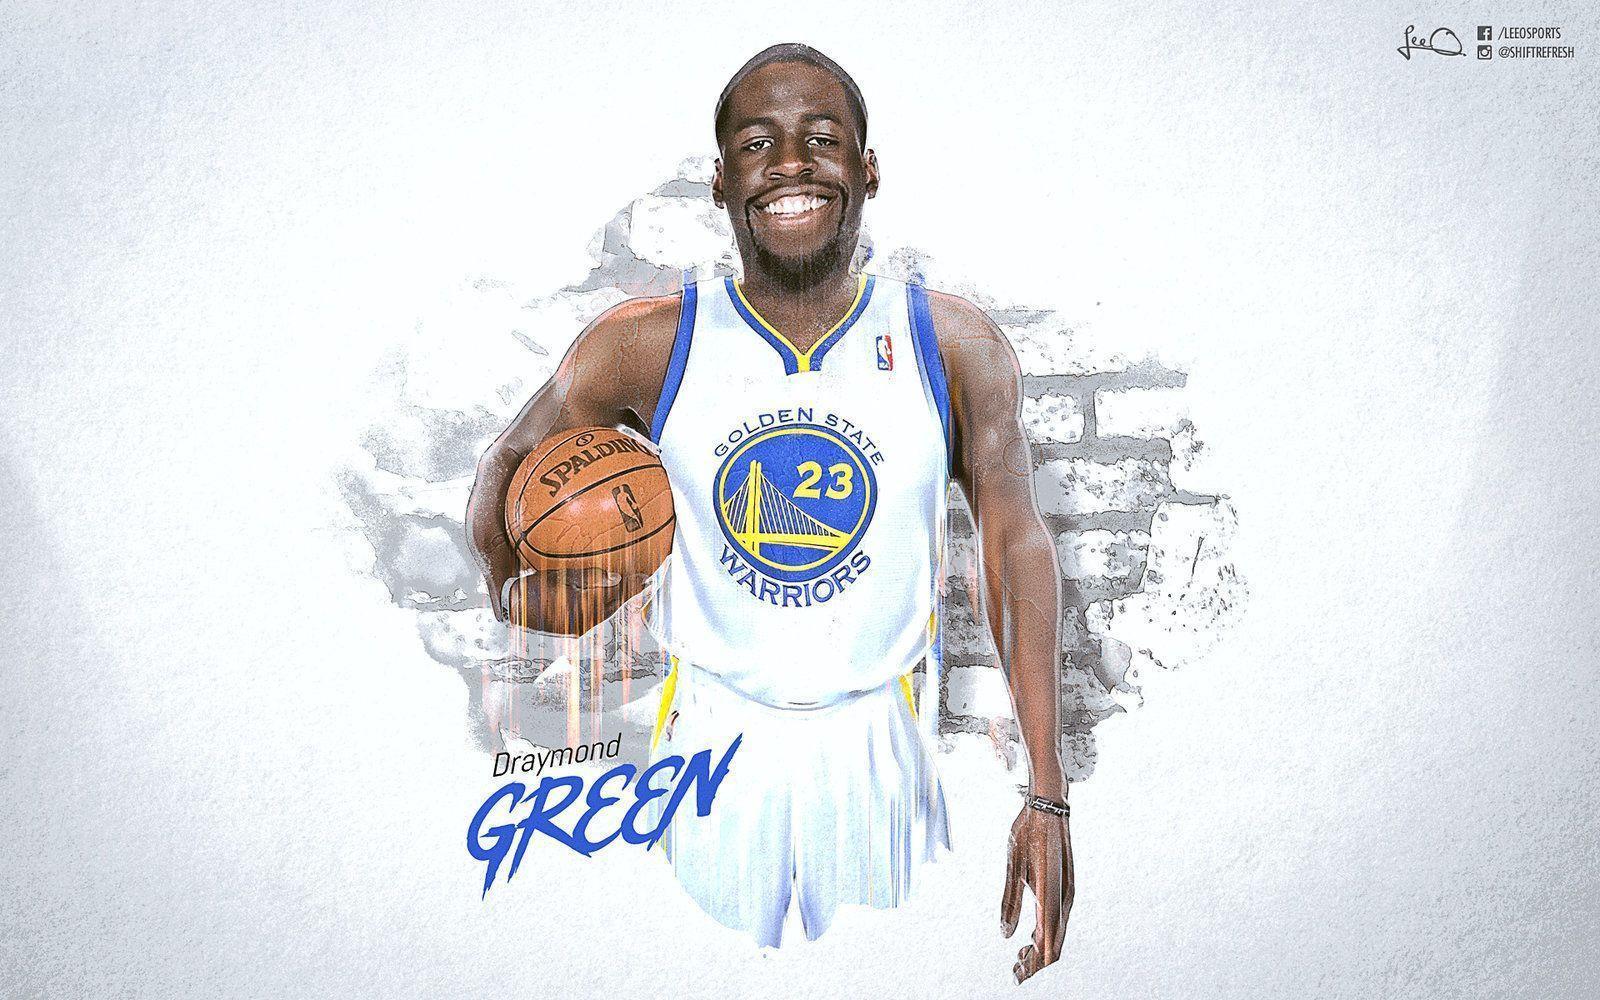 Draymond Green Wallpaper High Resolution and Quality Download